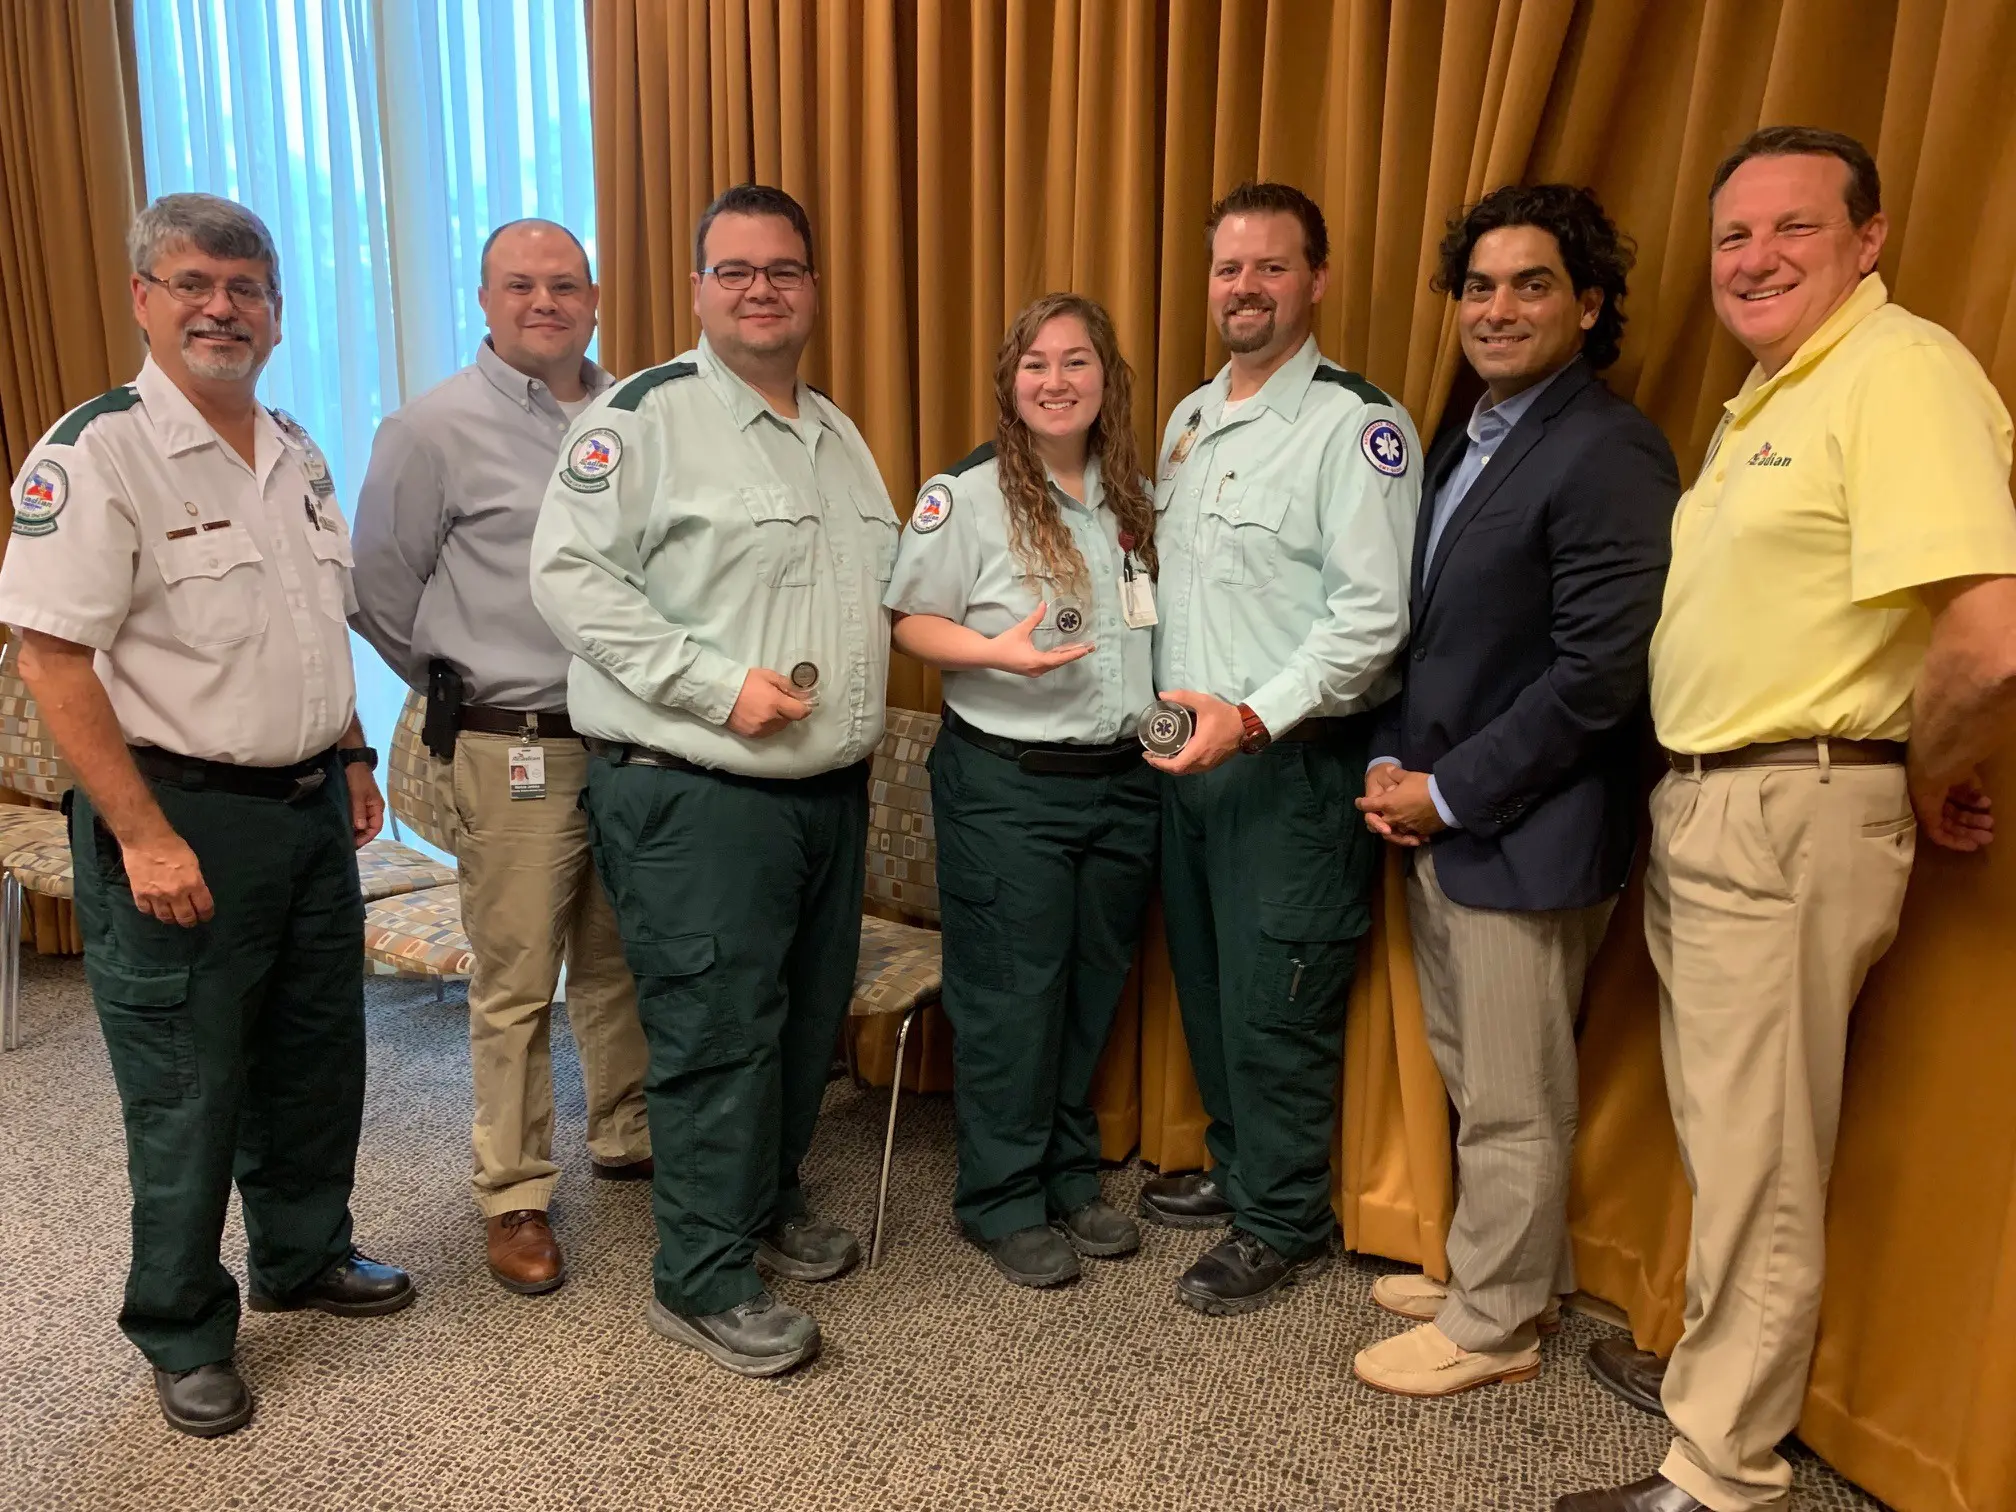 Northshore medics awarded with challenge coins